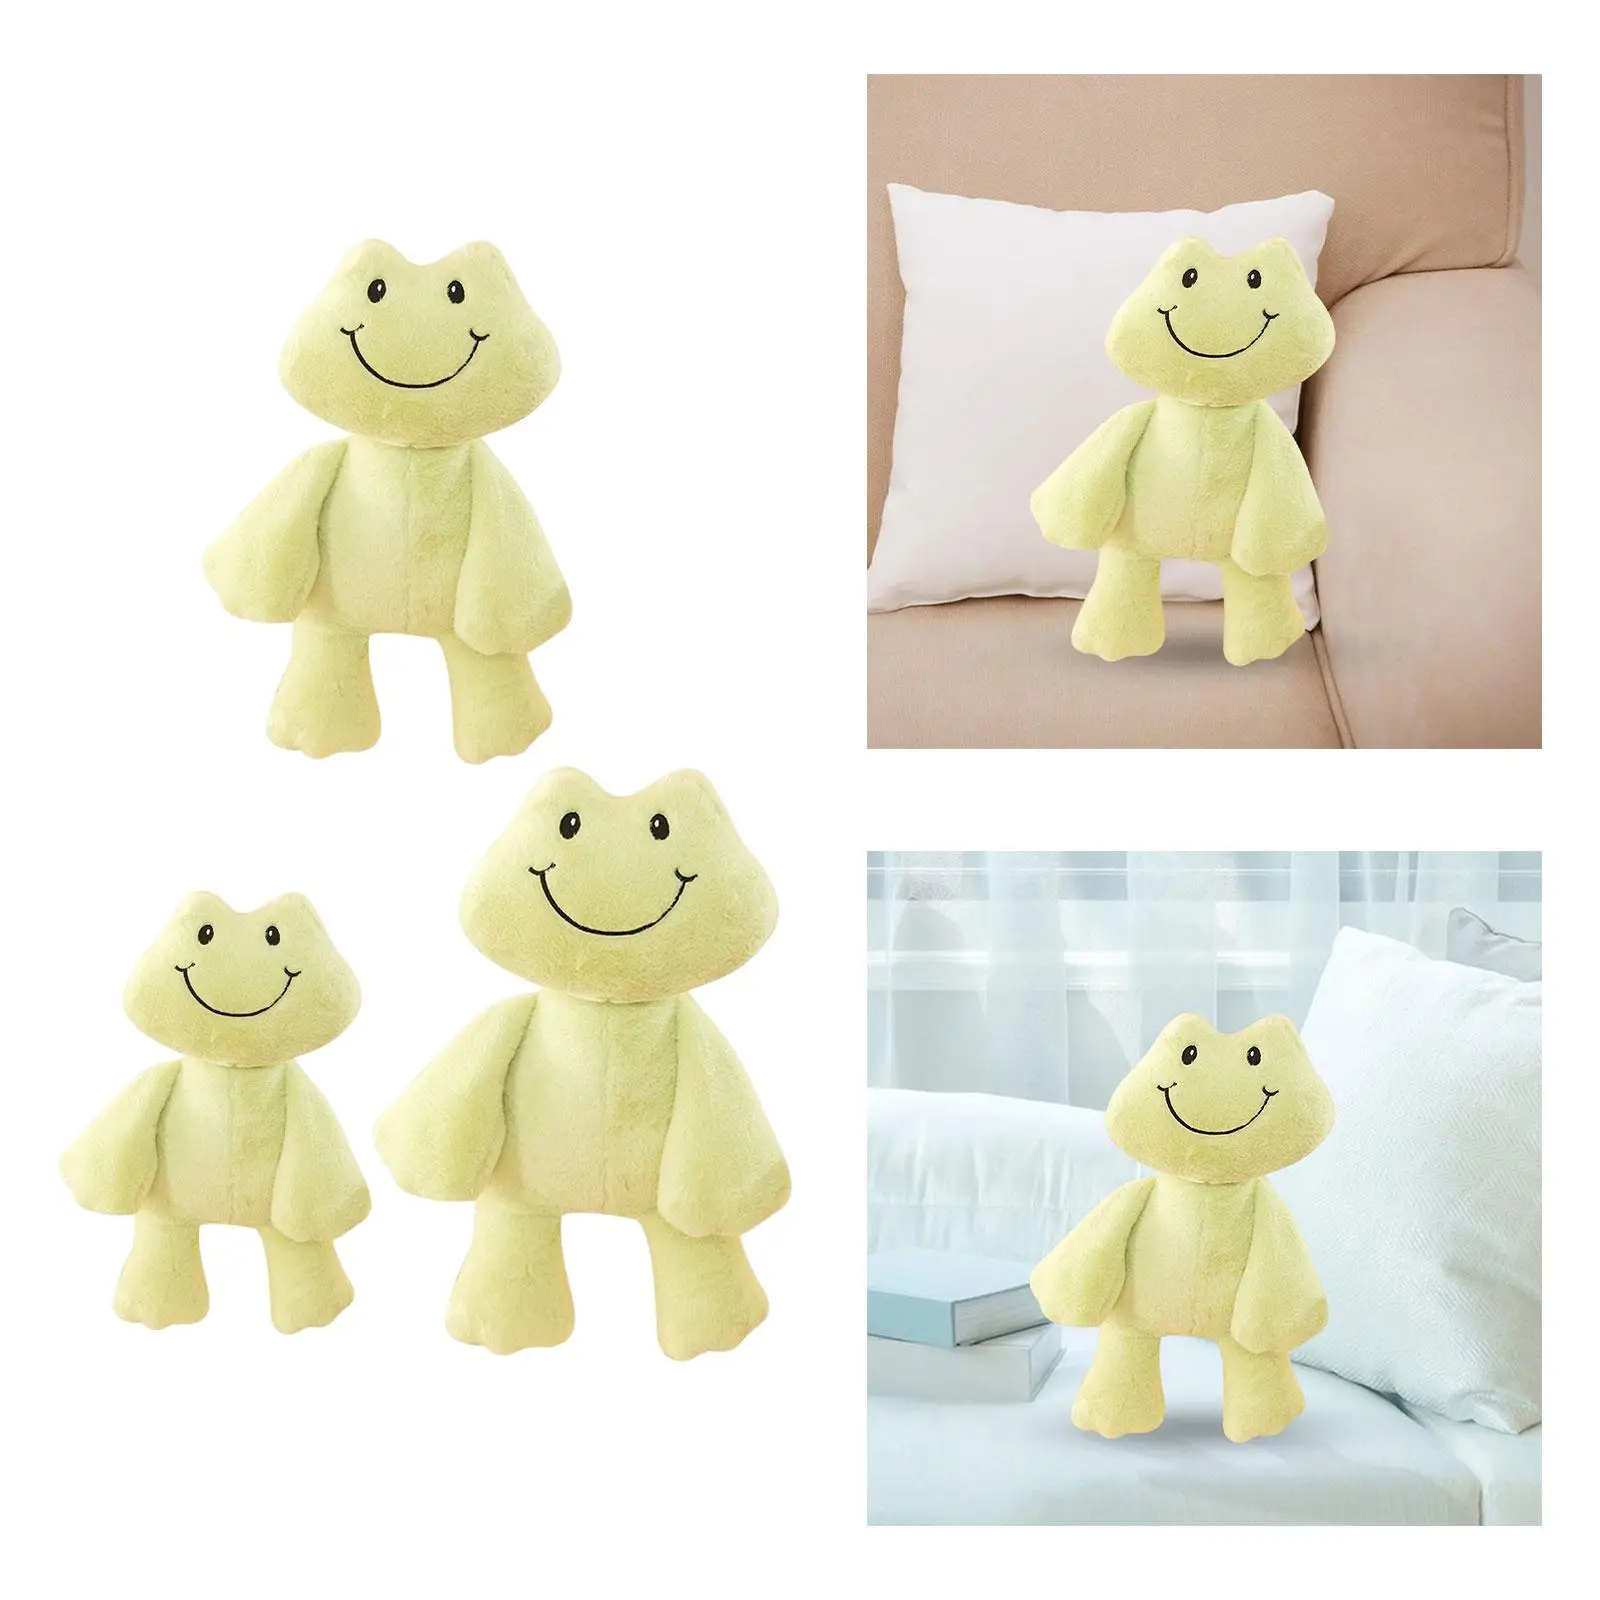 Cuddly Frog Plush Toy Cushion Frog Pillow for Theme Party Toddlers Children